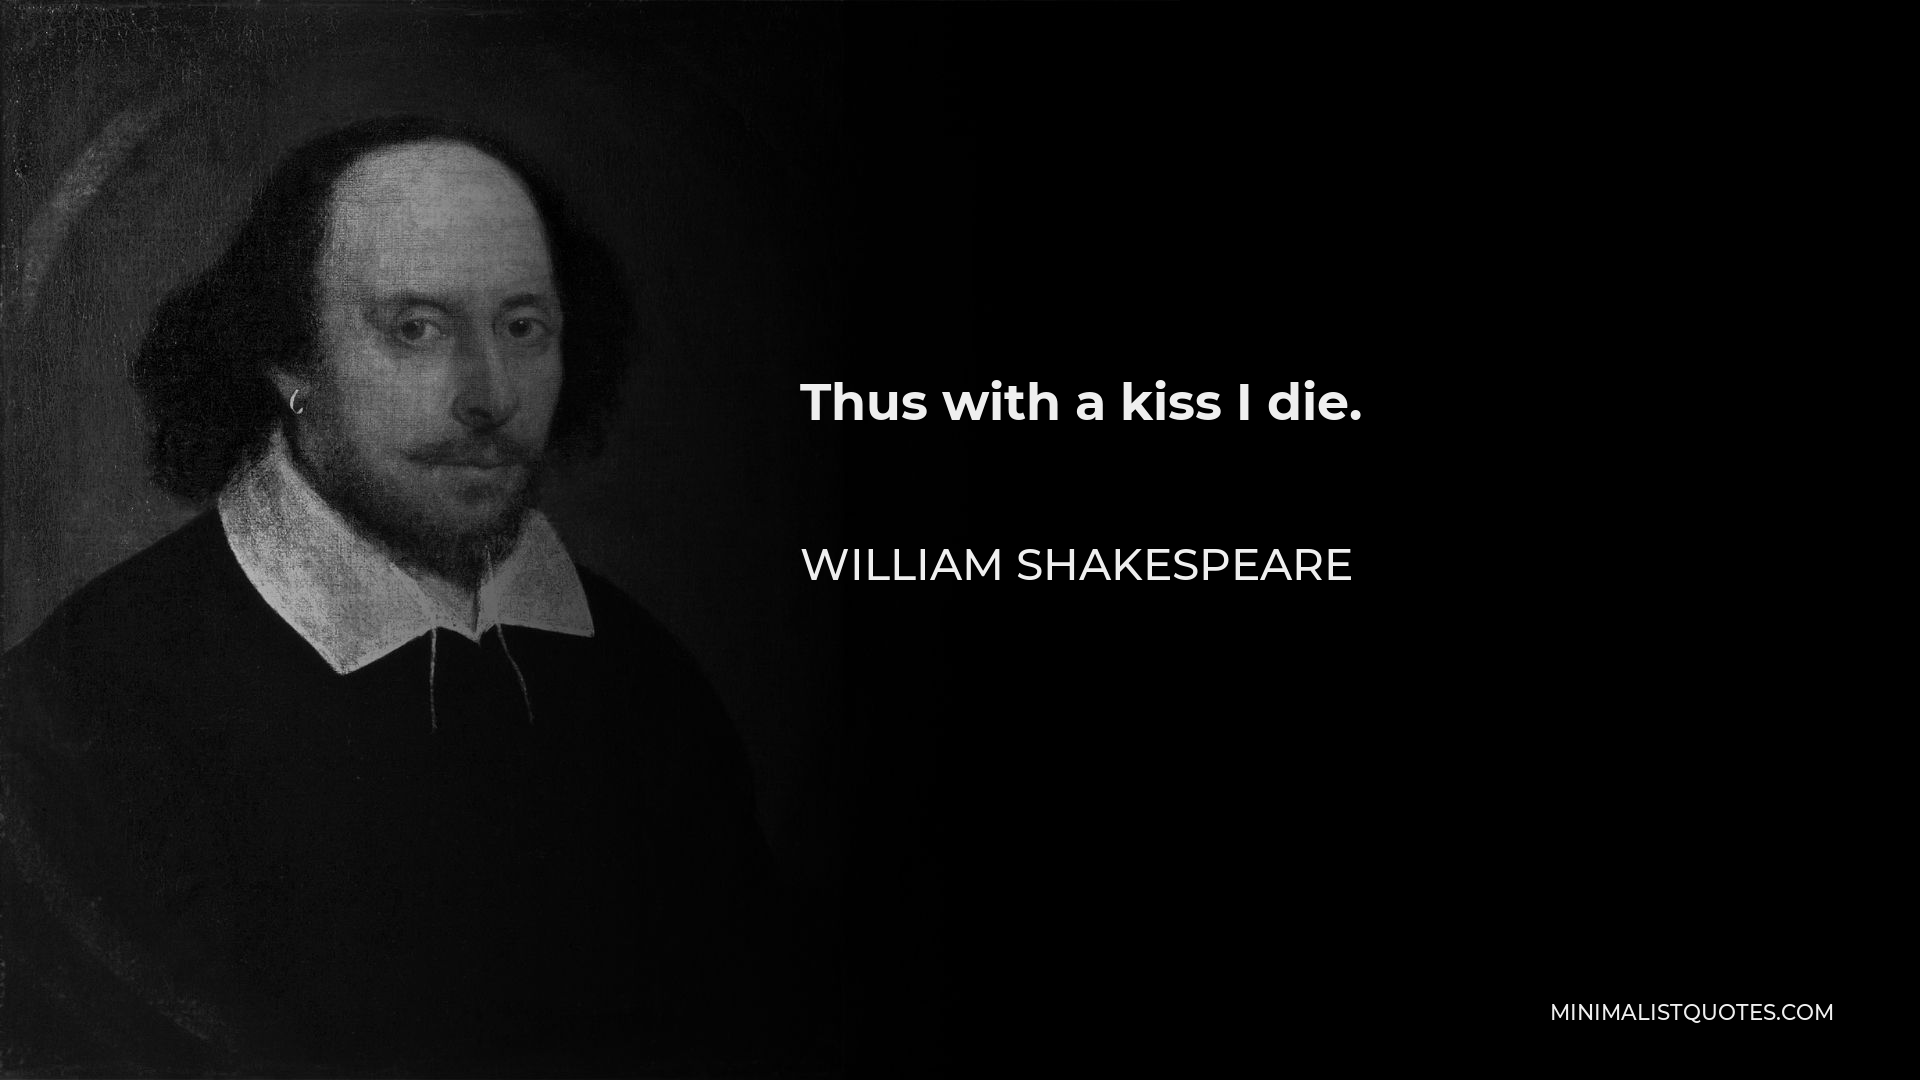 William Shakespeare Quote - Thus with a kiss I die.